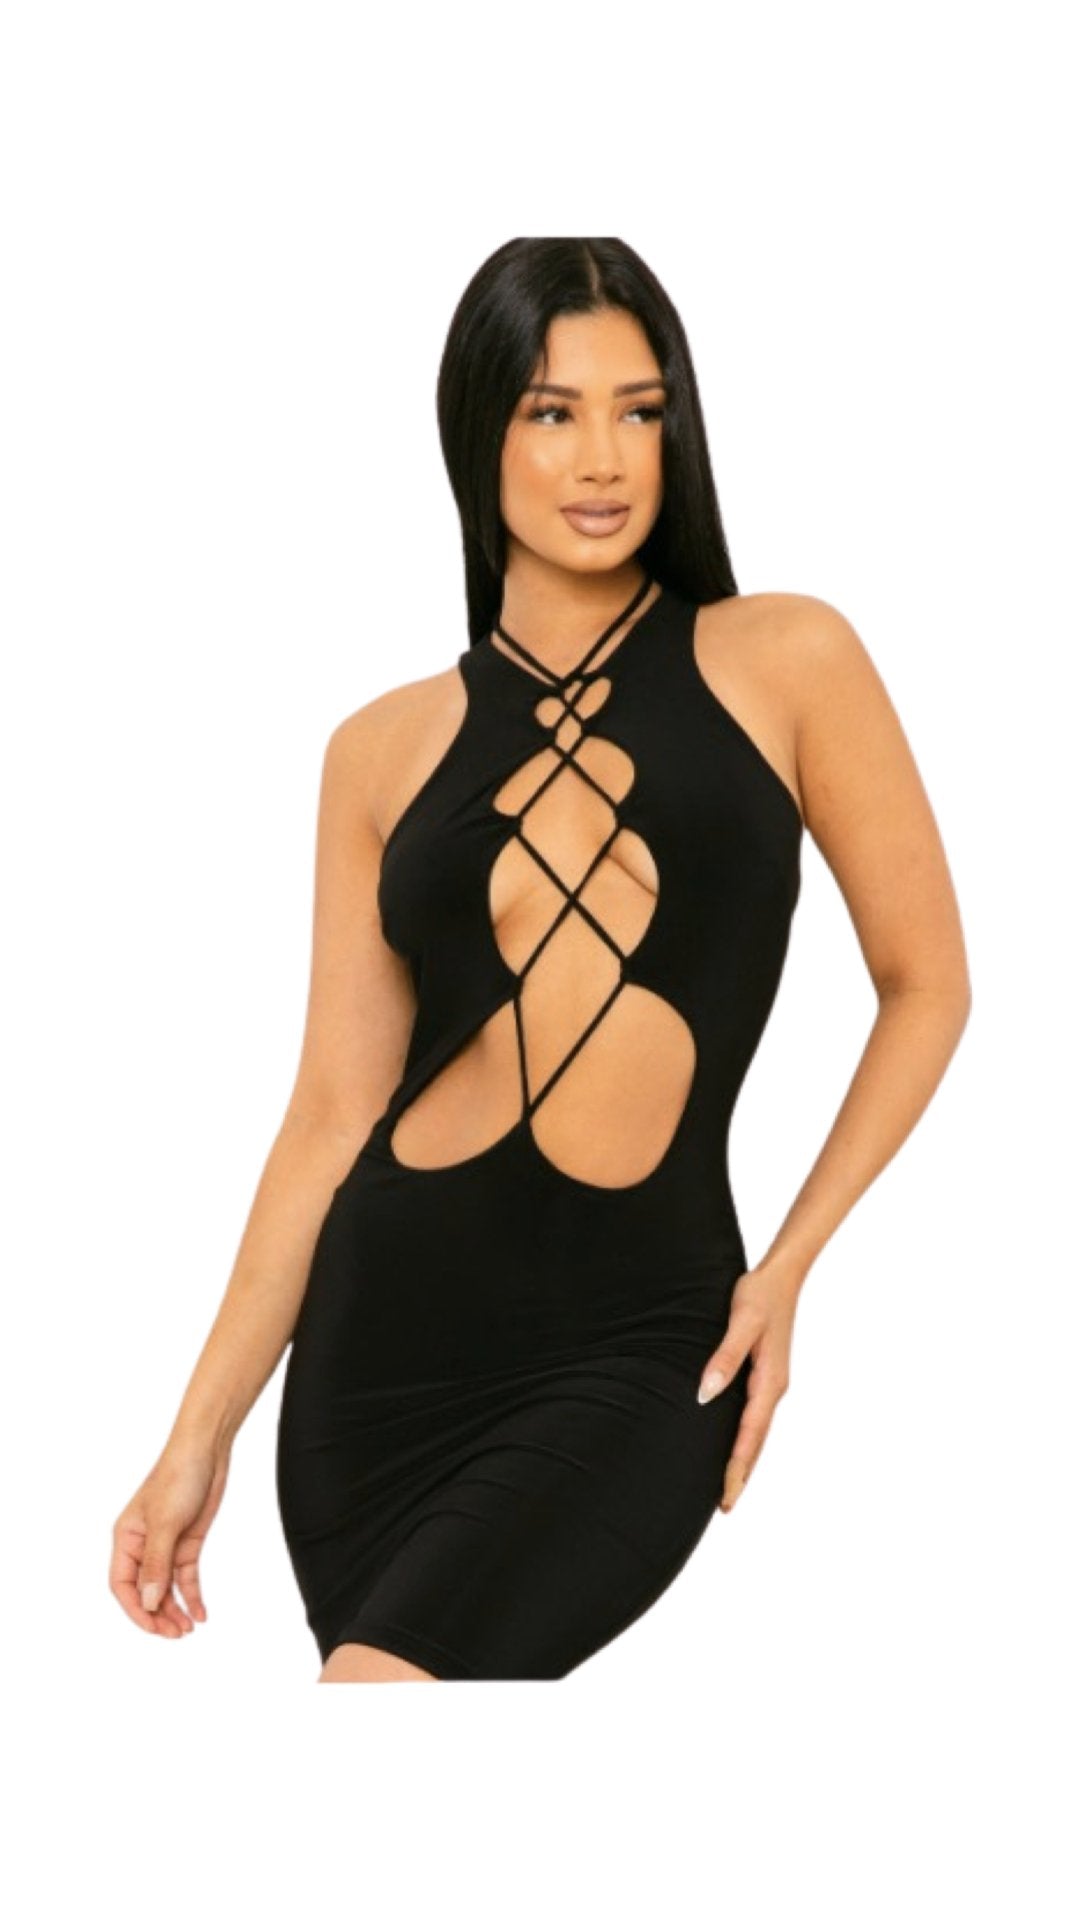 Front Tie Up Bodycon Dress Black - Model Express VancouverClothing